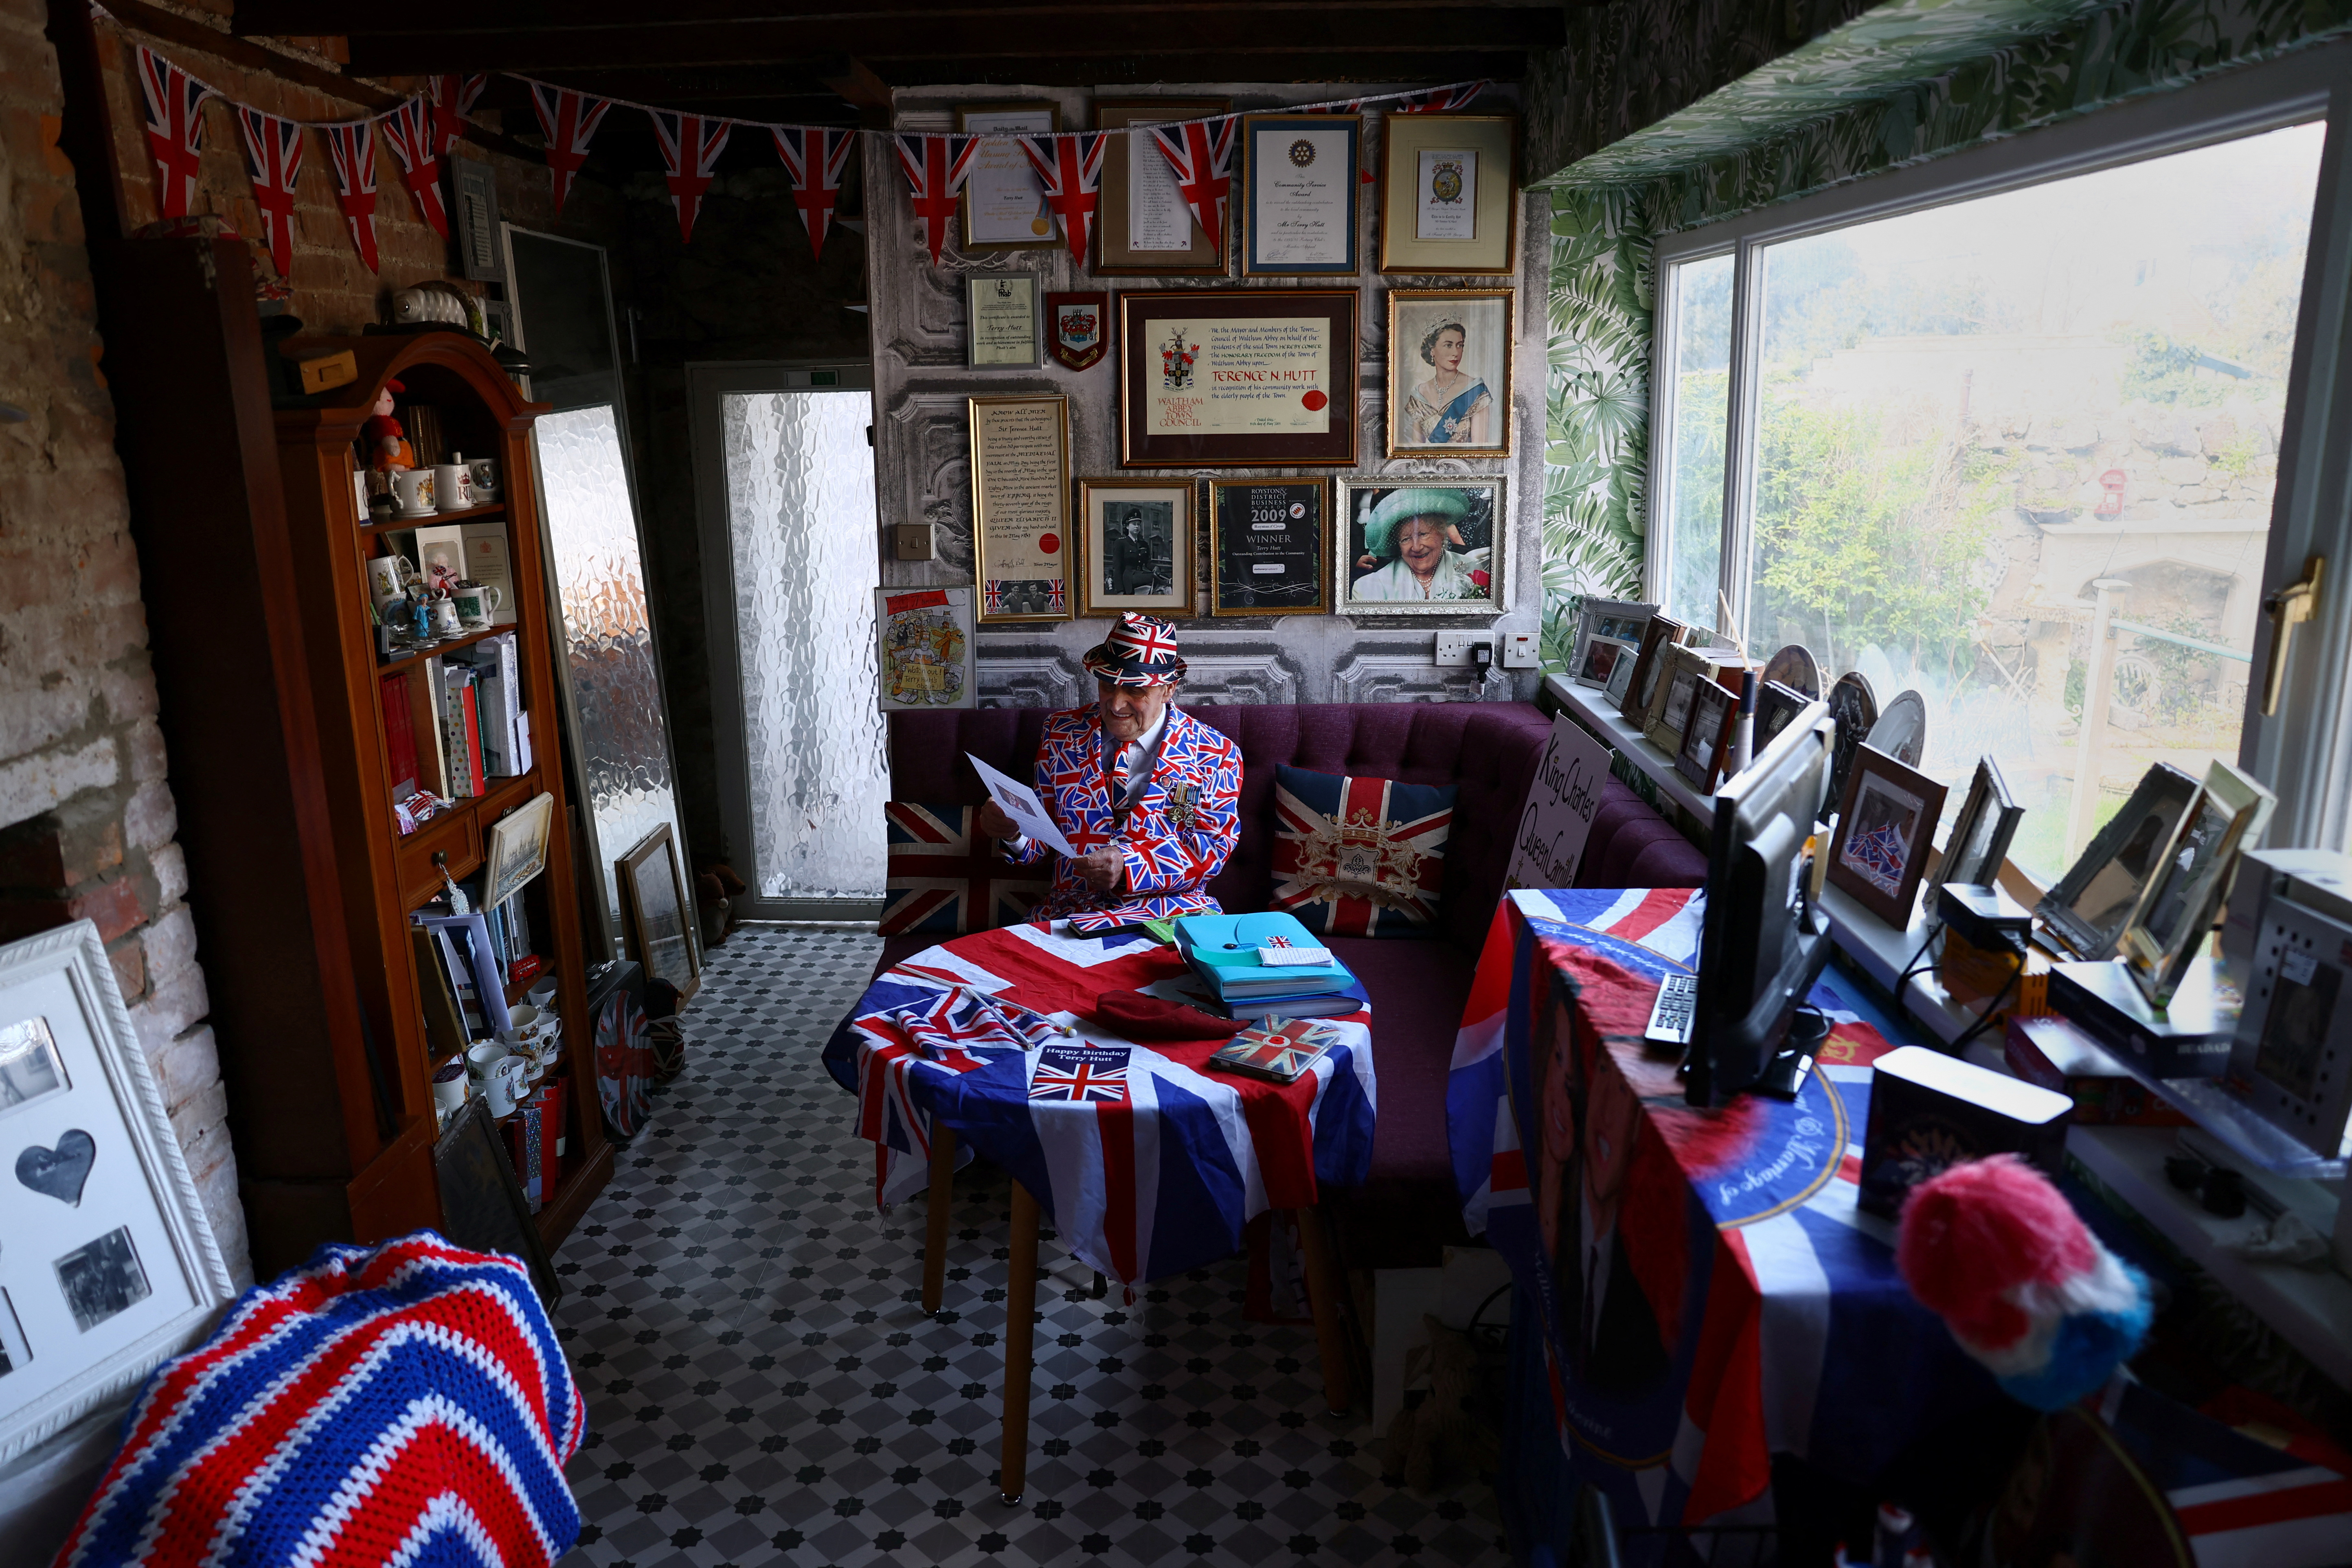 Terry Hutt a life long royals fan sits surrounded by royal memorabilia at his home in Weston-super-Mare